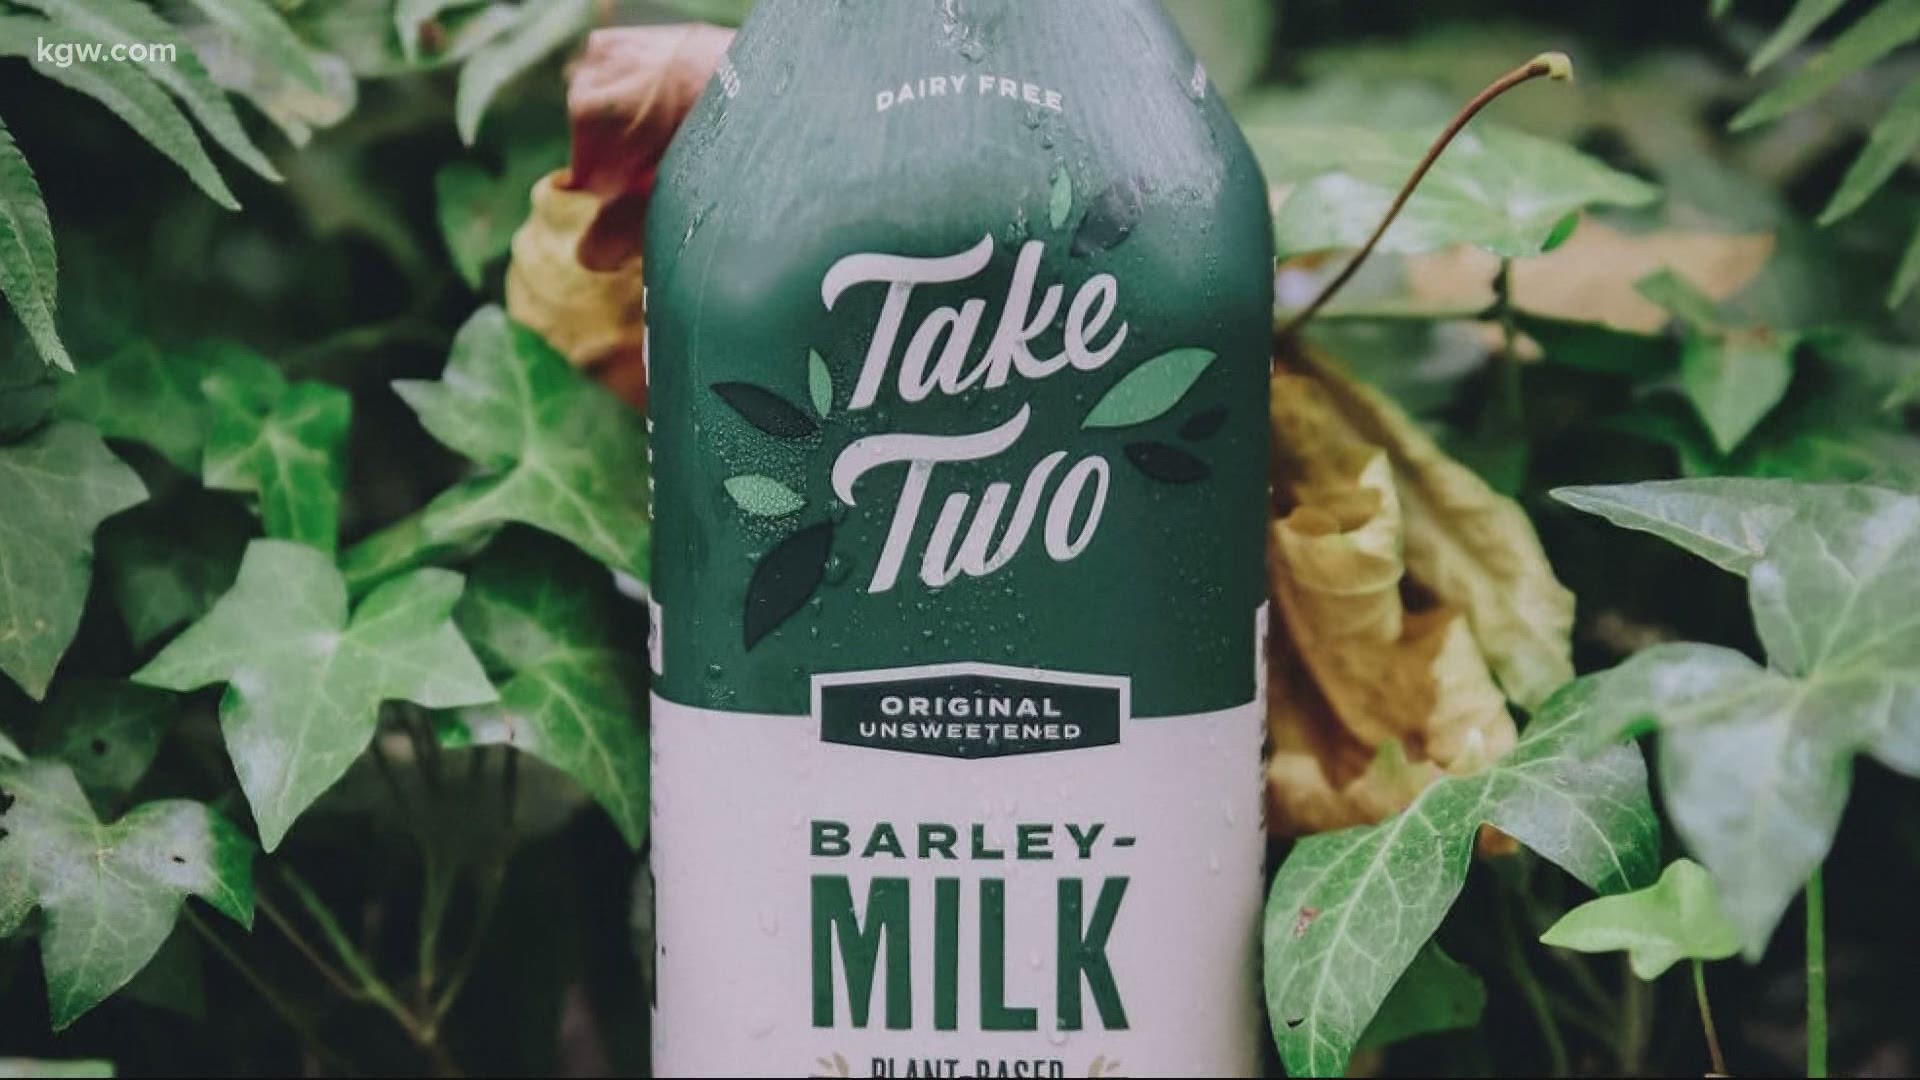 A Portland company is producing a first-of-its-kind barley-based milk alternative that it launched right as the pandemic hit.